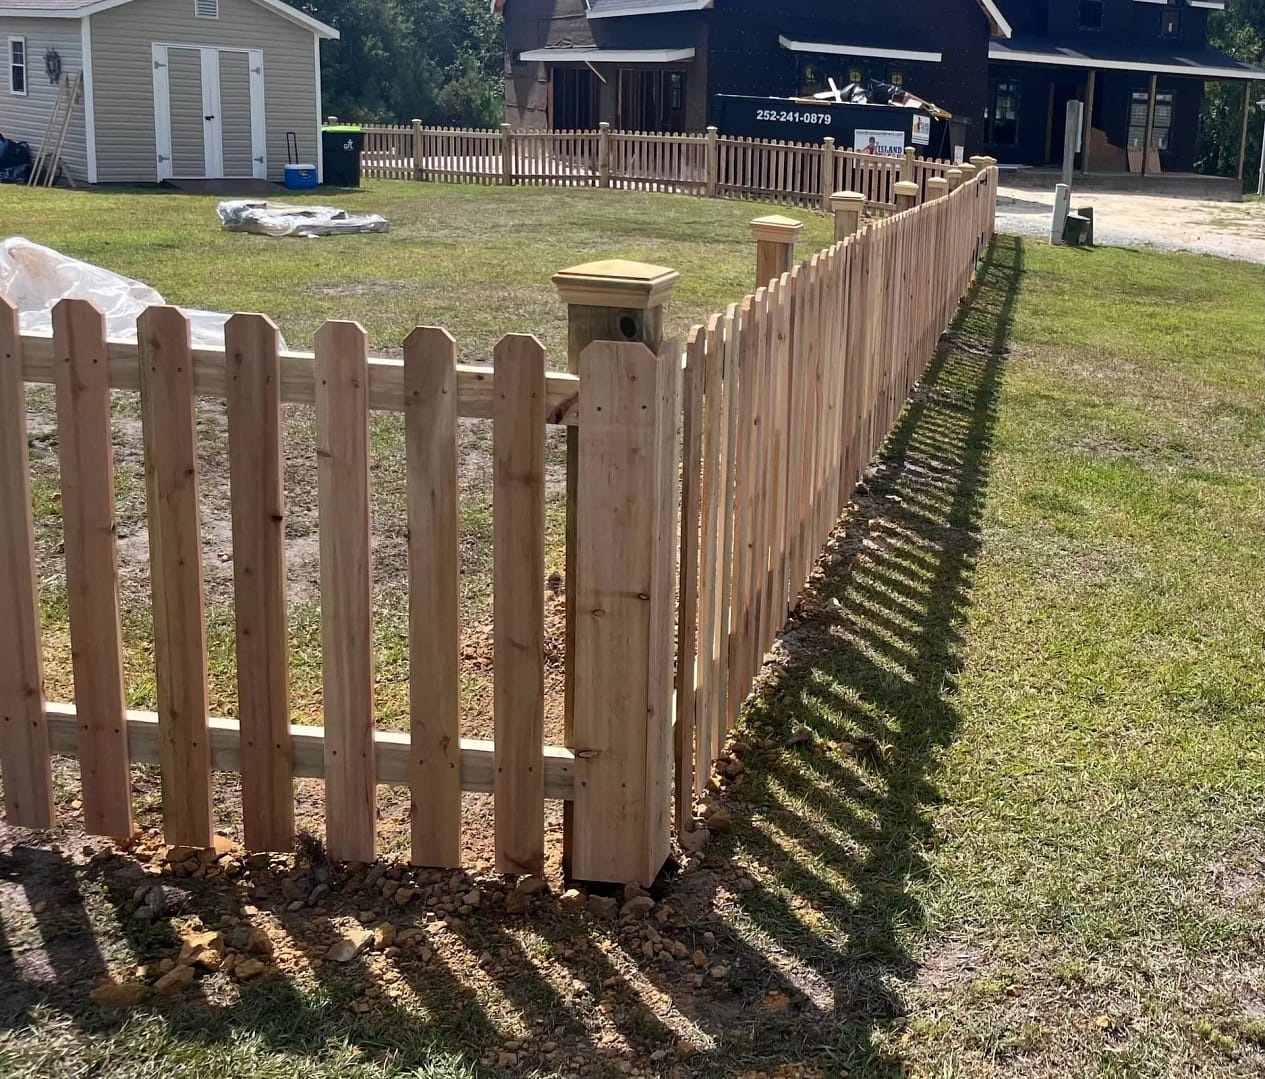 Element Fence Company builds wooden fences that cater to a wide range of aesthetics and security requirements. You'll be proud of the fence we build...together.